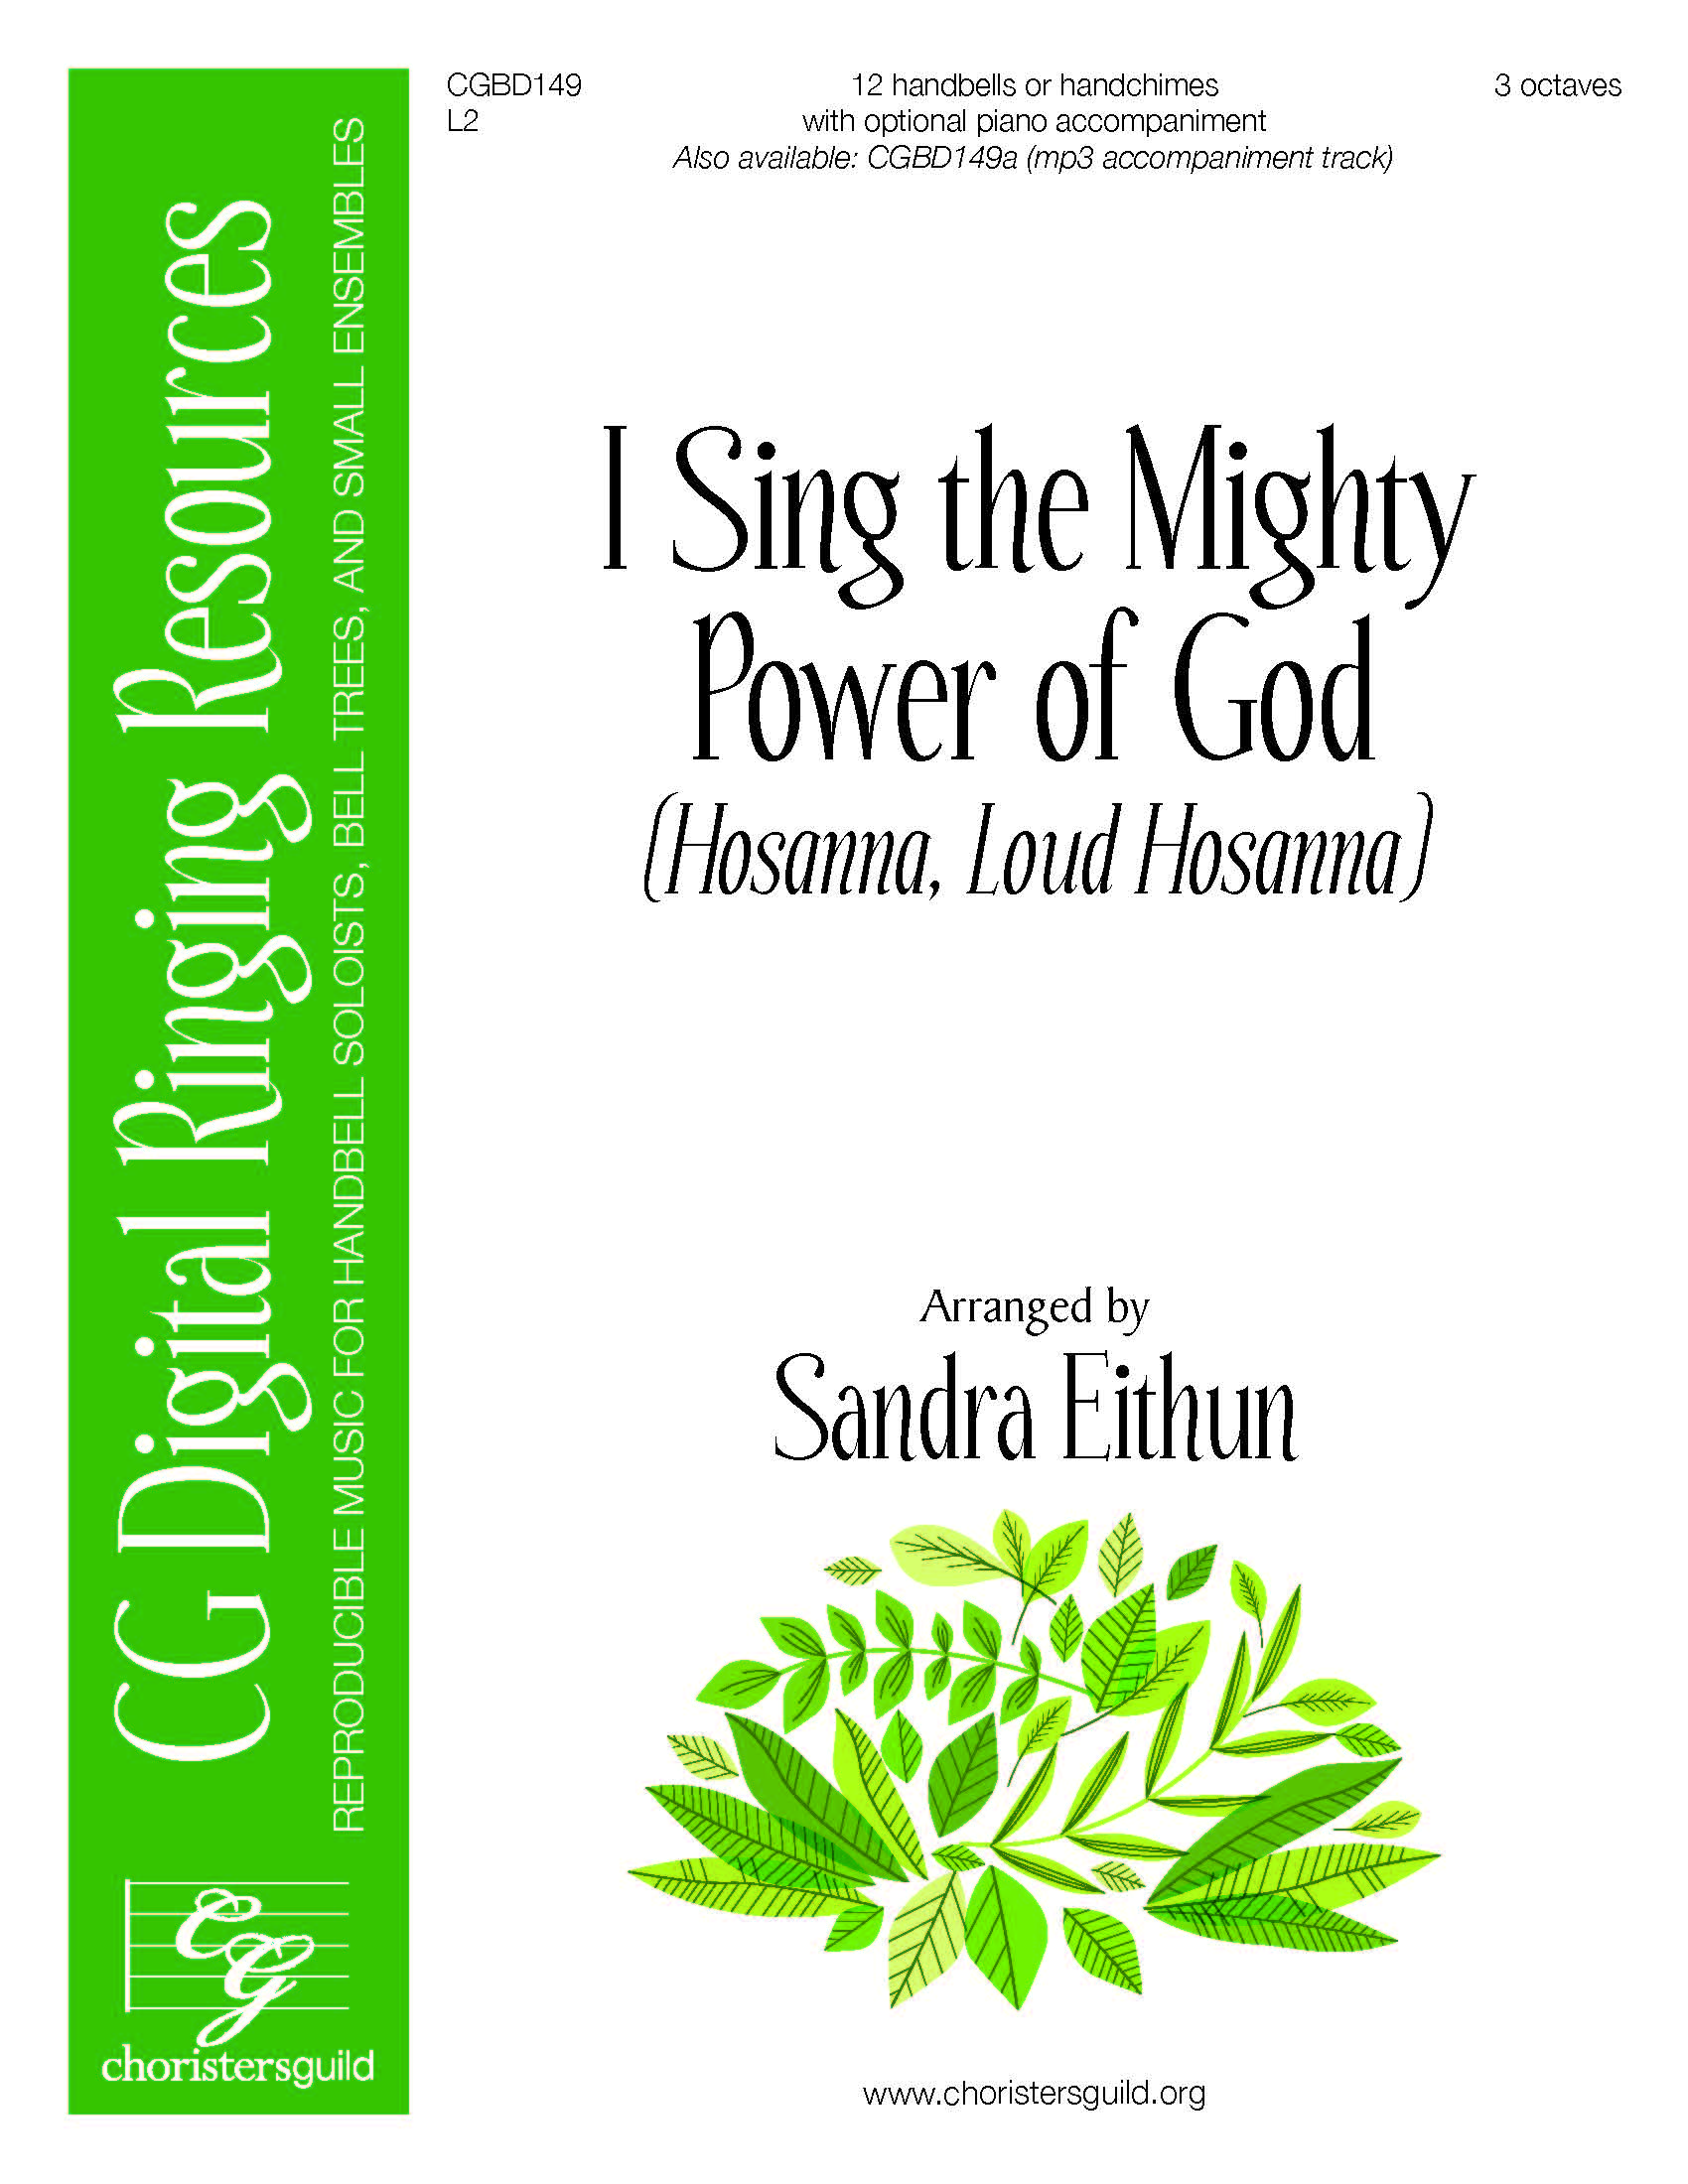 I Sing the Mighty Power of God - Digital Accompaniment Track